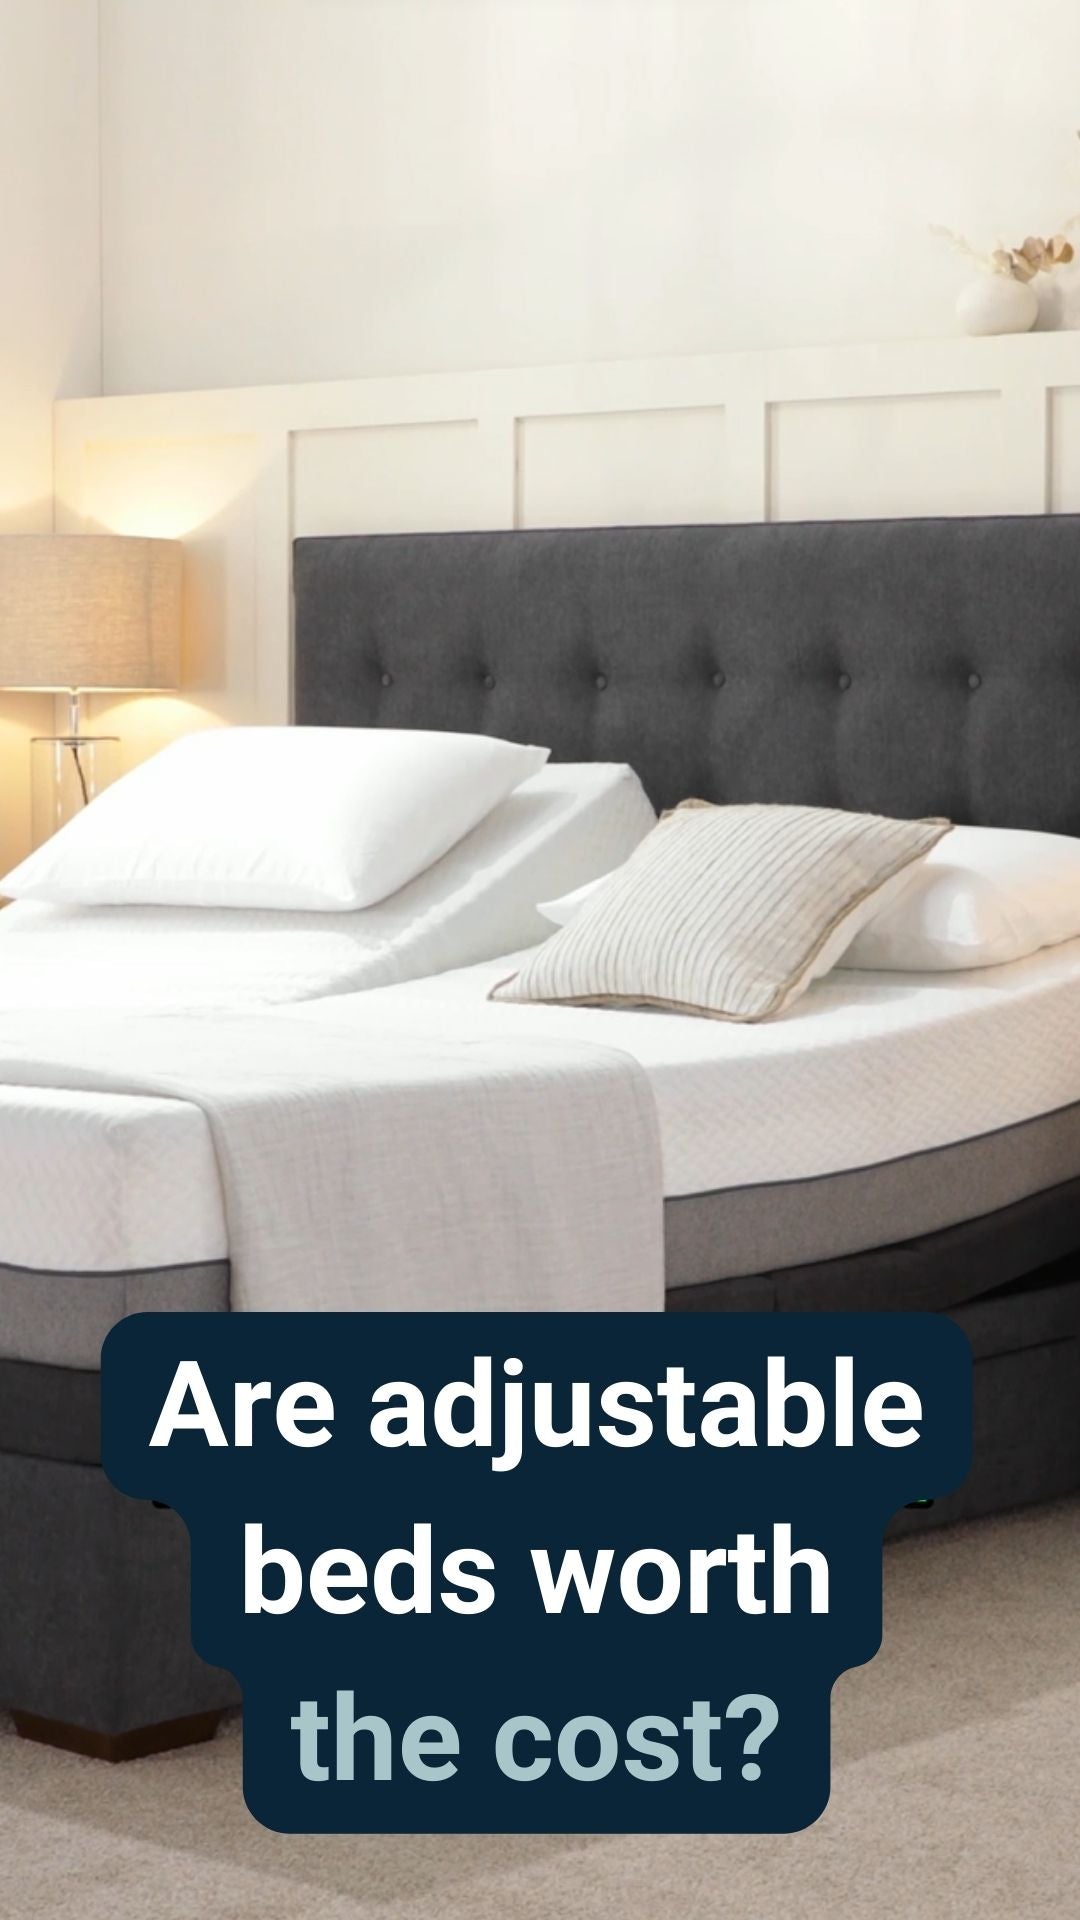 A dual adjustable bed with the caption 'Are adjustable beds worth the cost?'